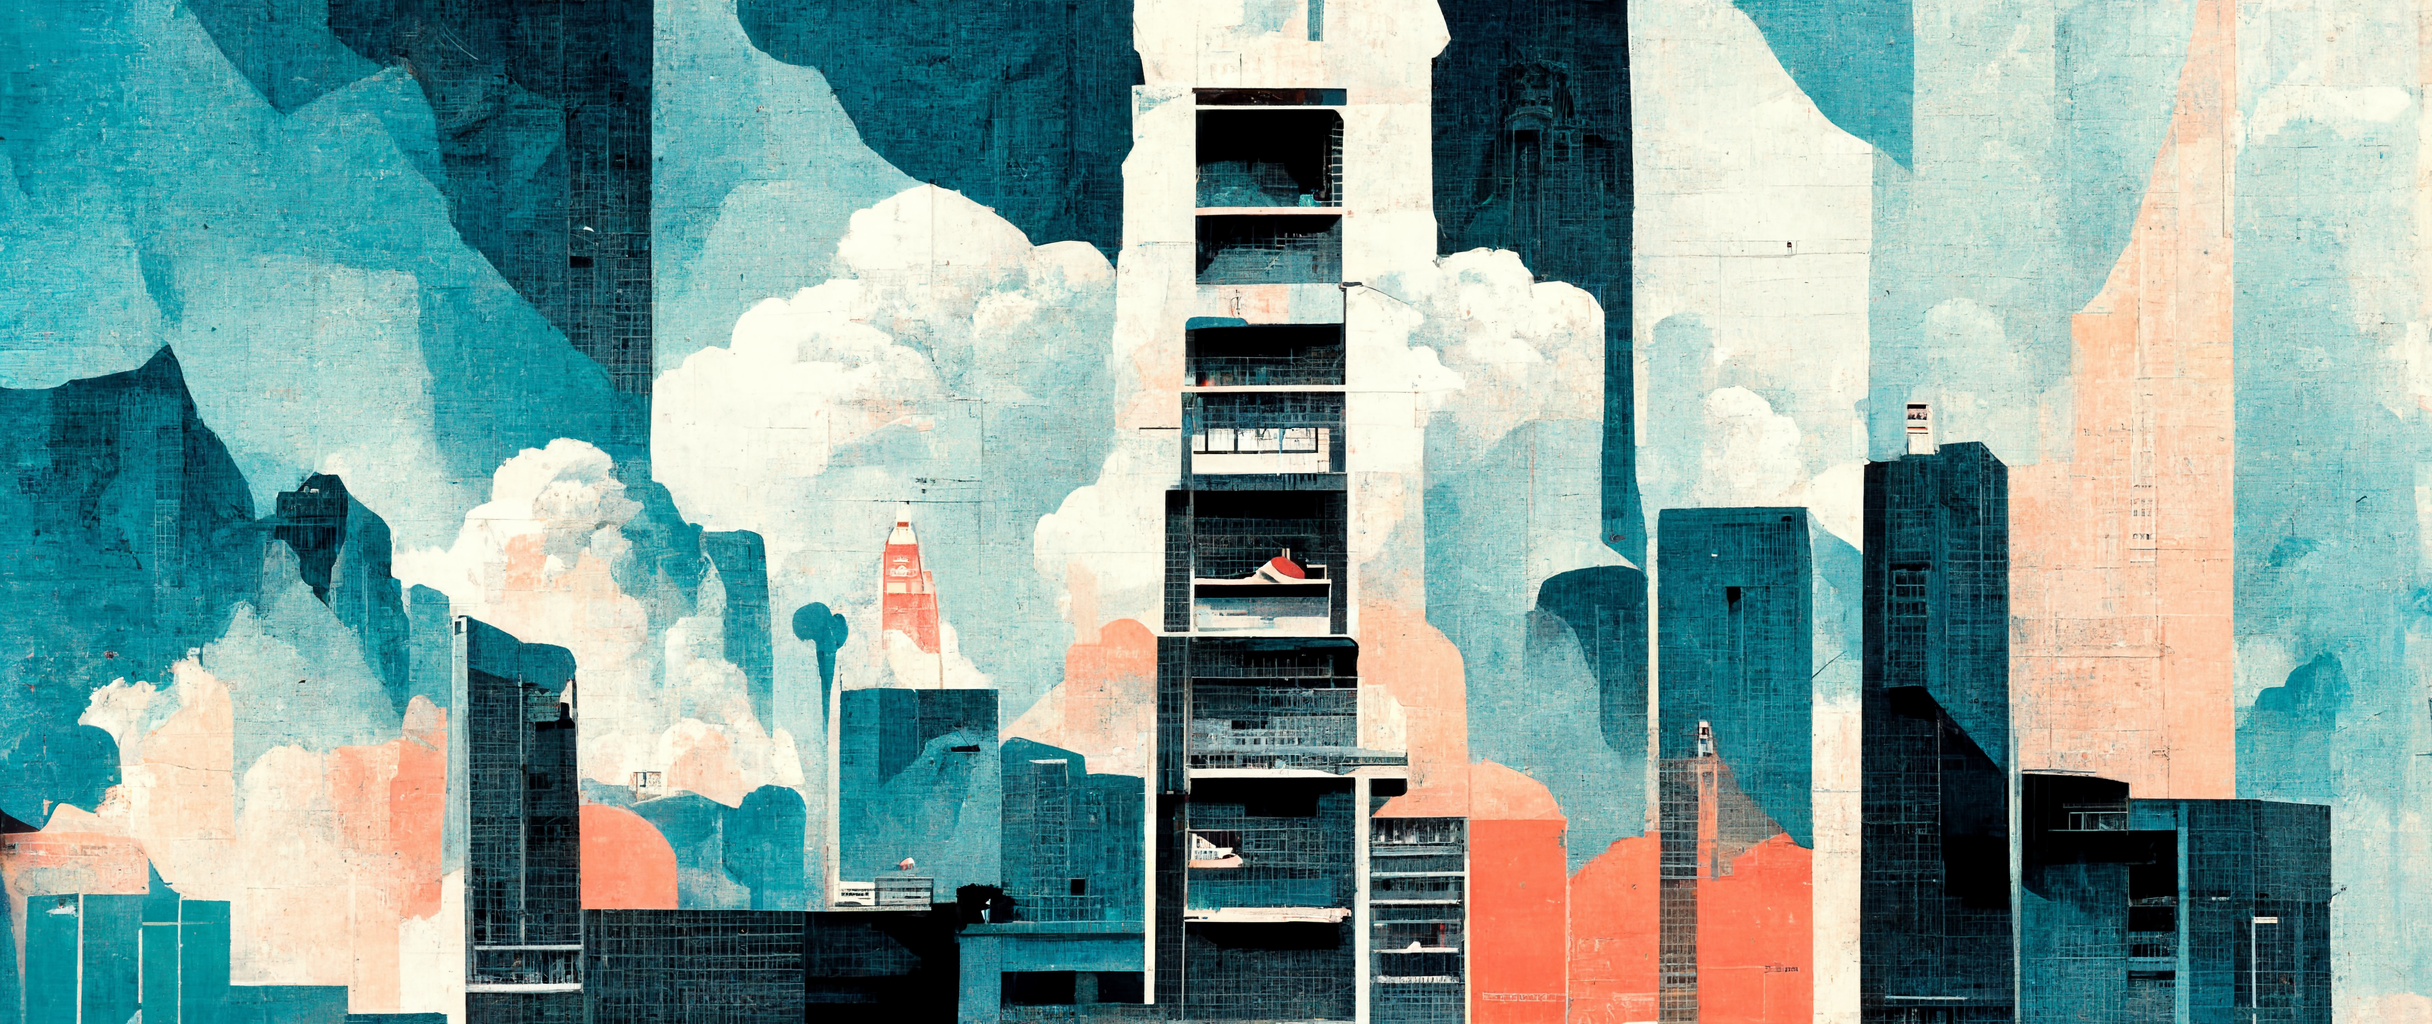 vibe_giant_pile_of_sneakers_higher_than_a_city_city_built_aroun_4bfb45c4-147b-4a8c-ad95-2200ae8d5eb4